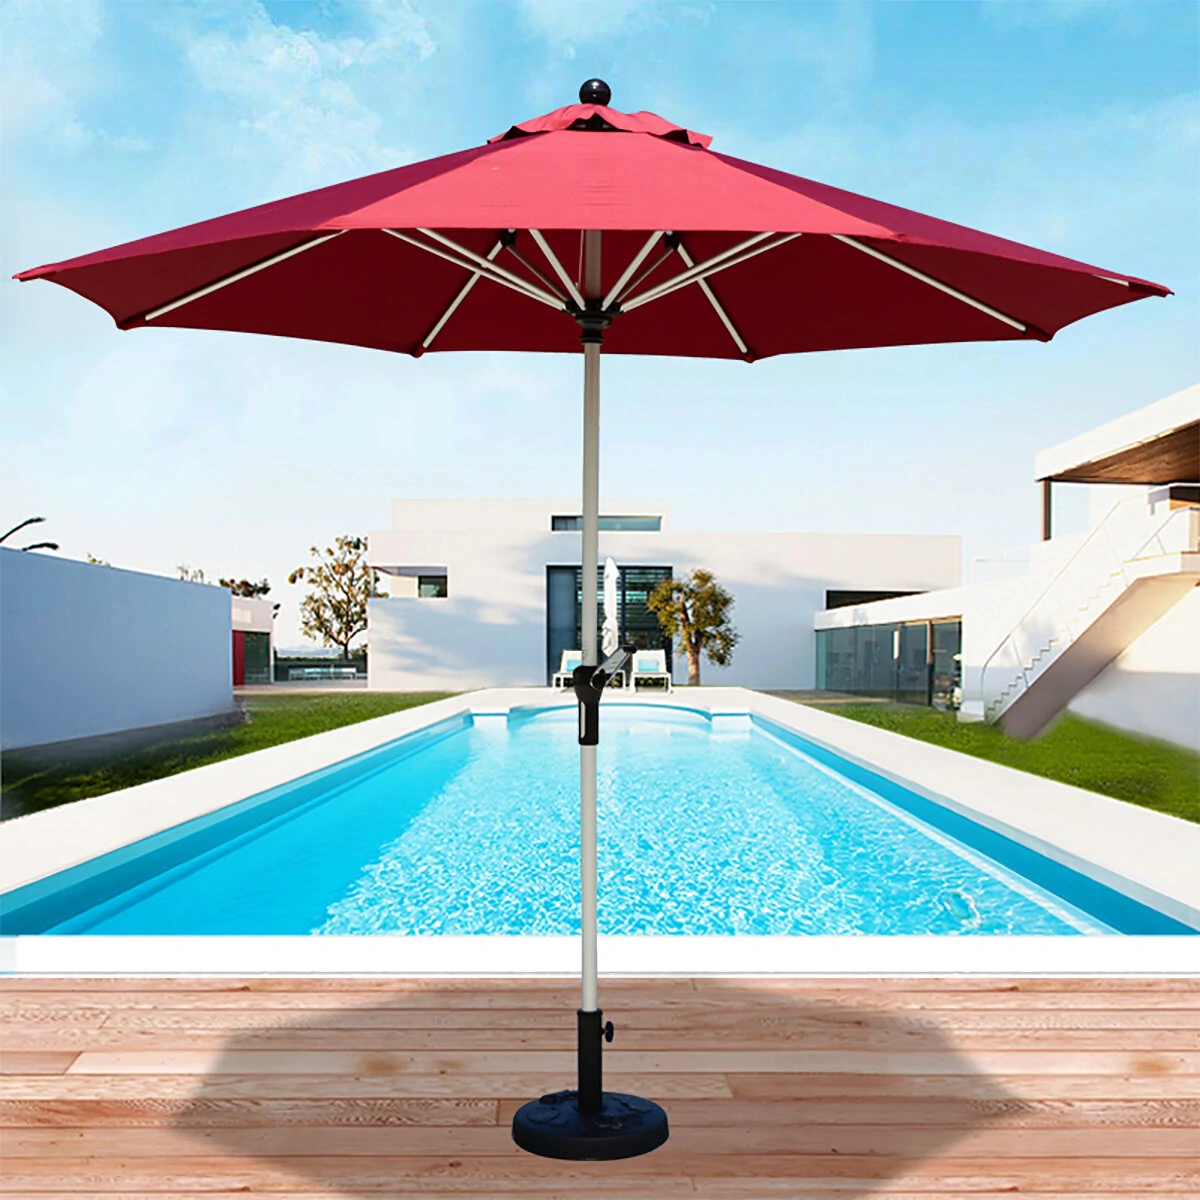 2.7m 8 Arm Parasol Canopy Cover Waterproof Awning Sun Shade Shelter Outdoor Garden Patio